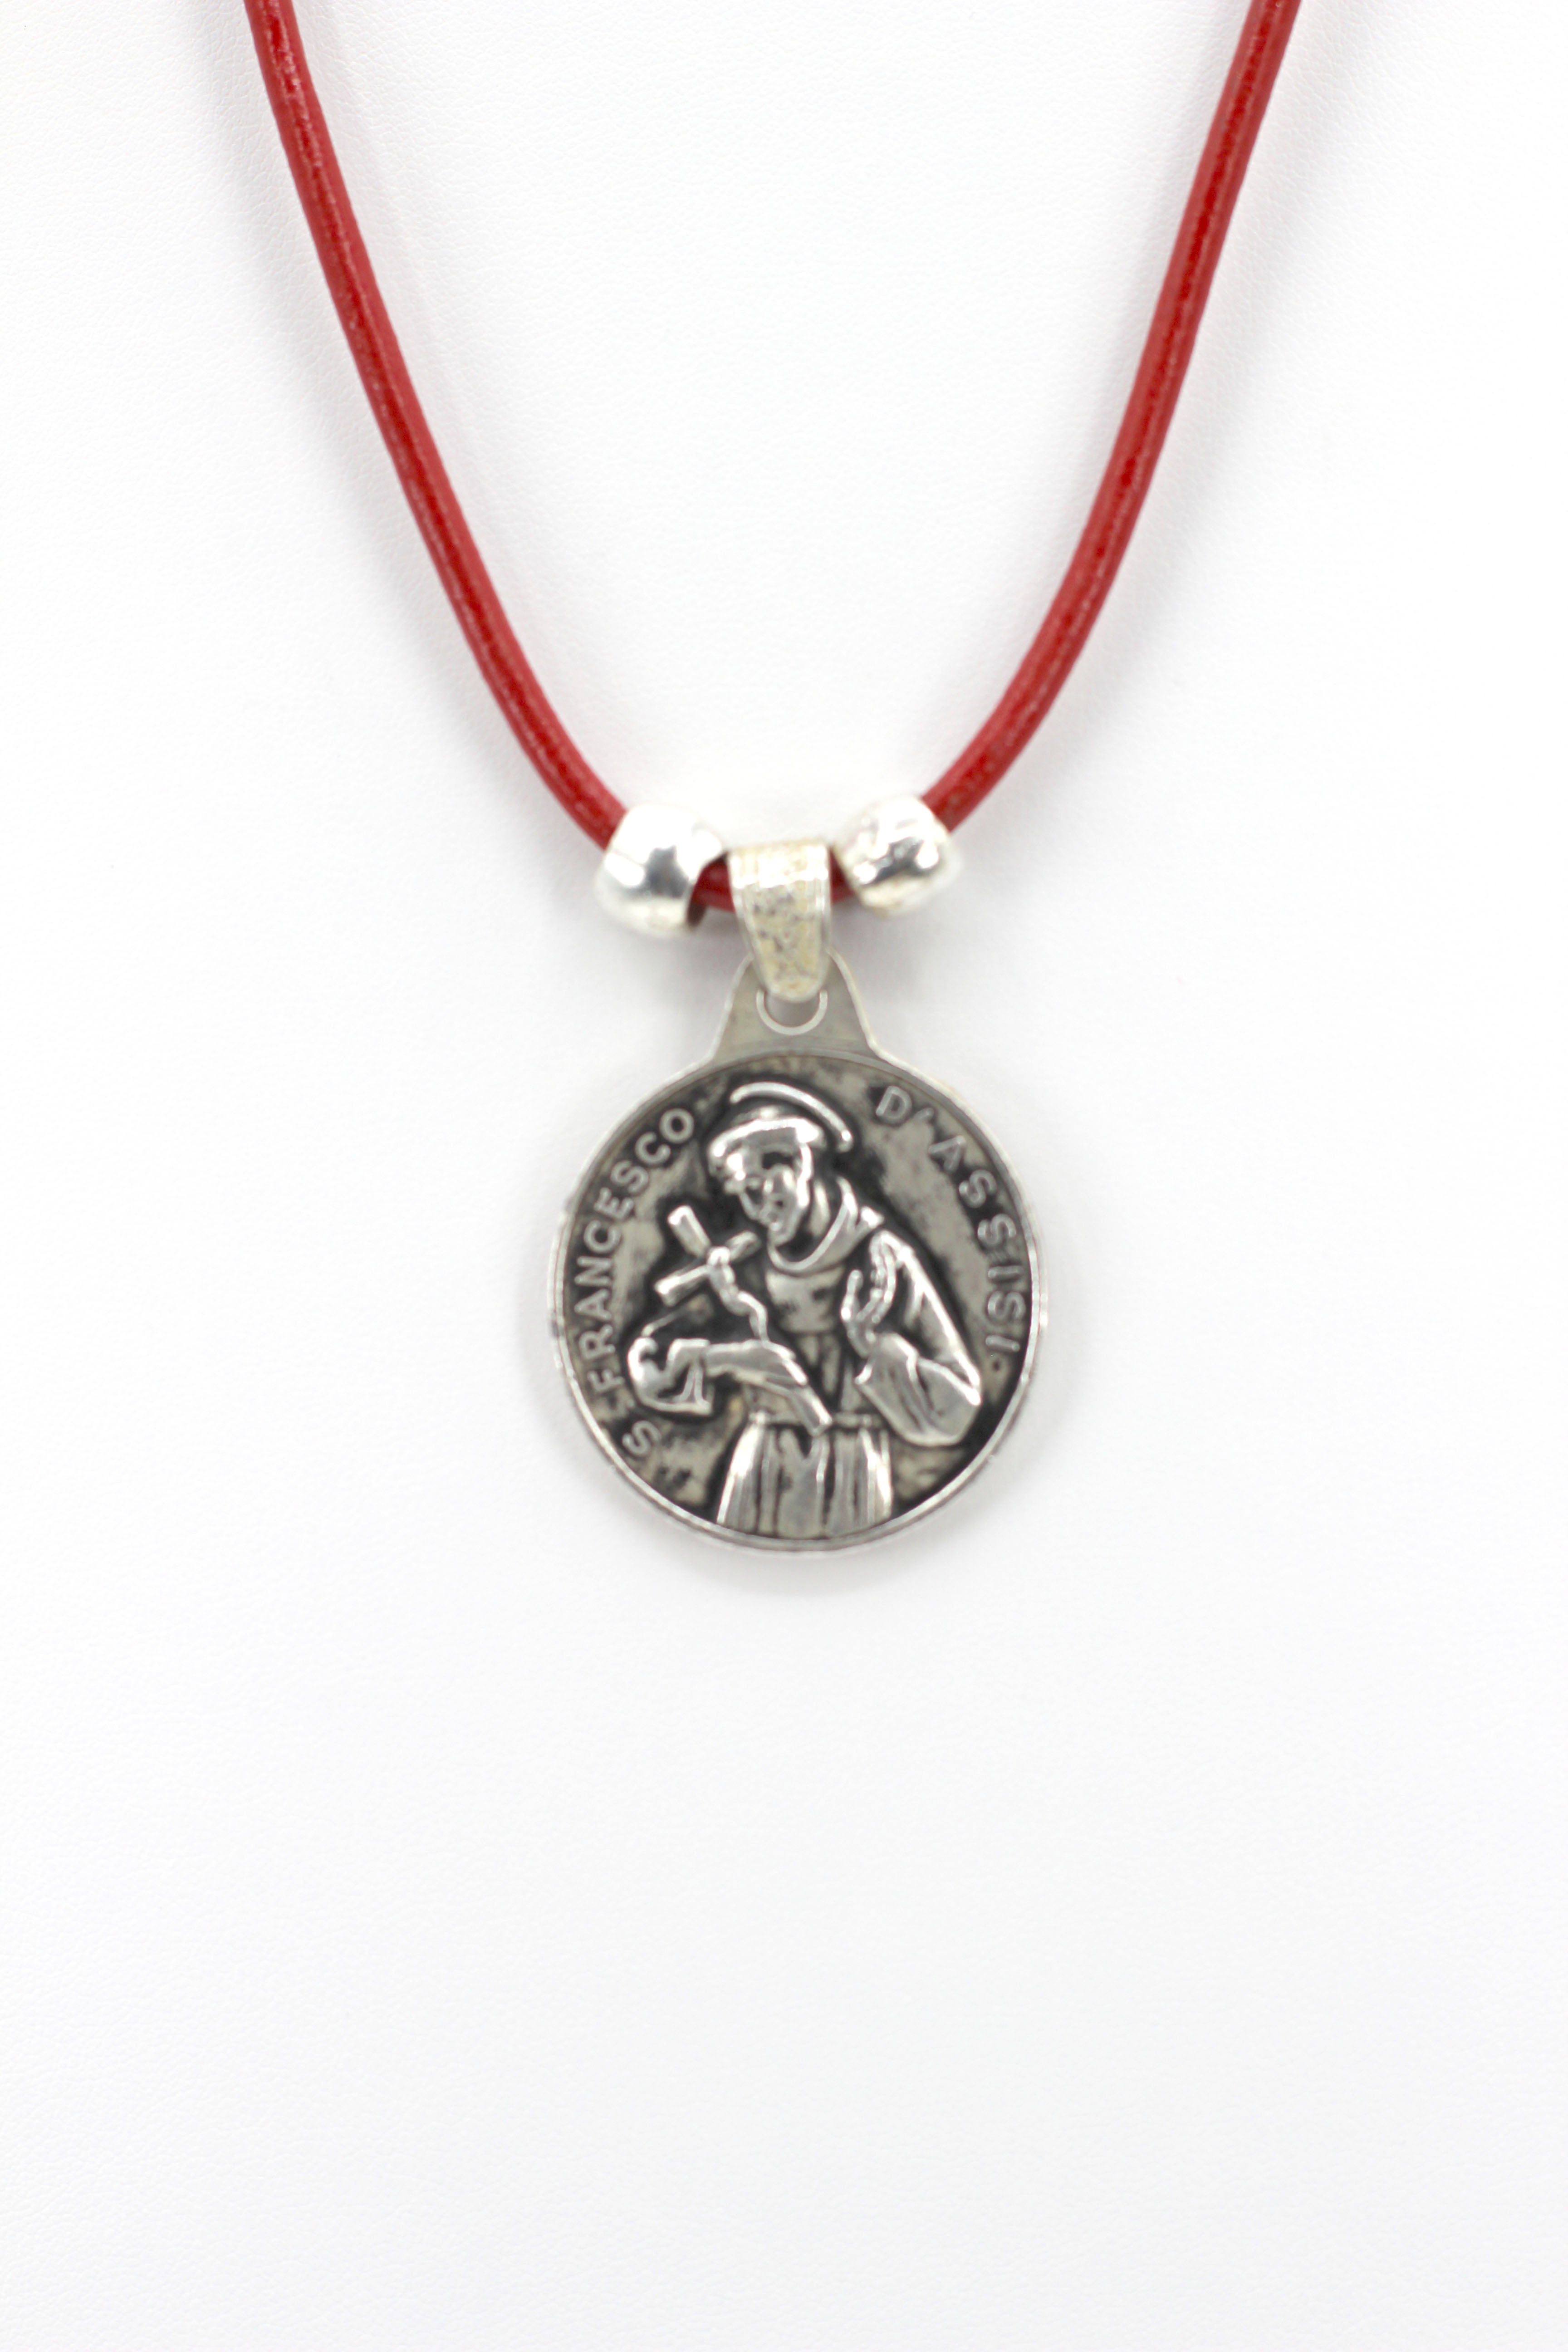 Vintage Necklace of Saint Francis of Assisi Handmade Jewelry with Genuine Leather strap by Graciela's Collection